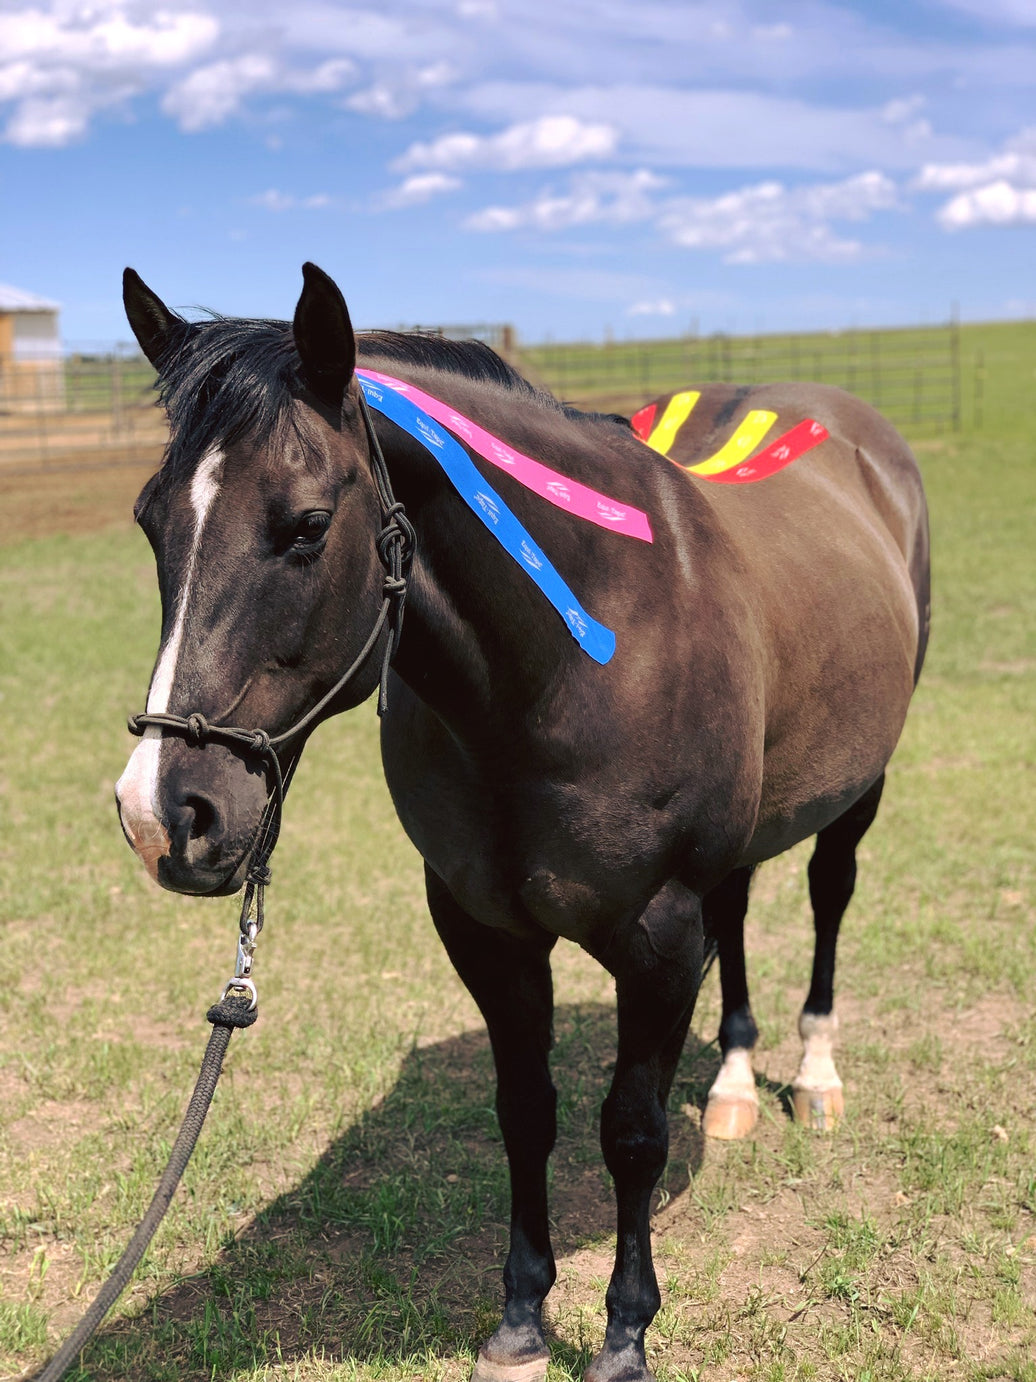 Why use Equi-Tape®?